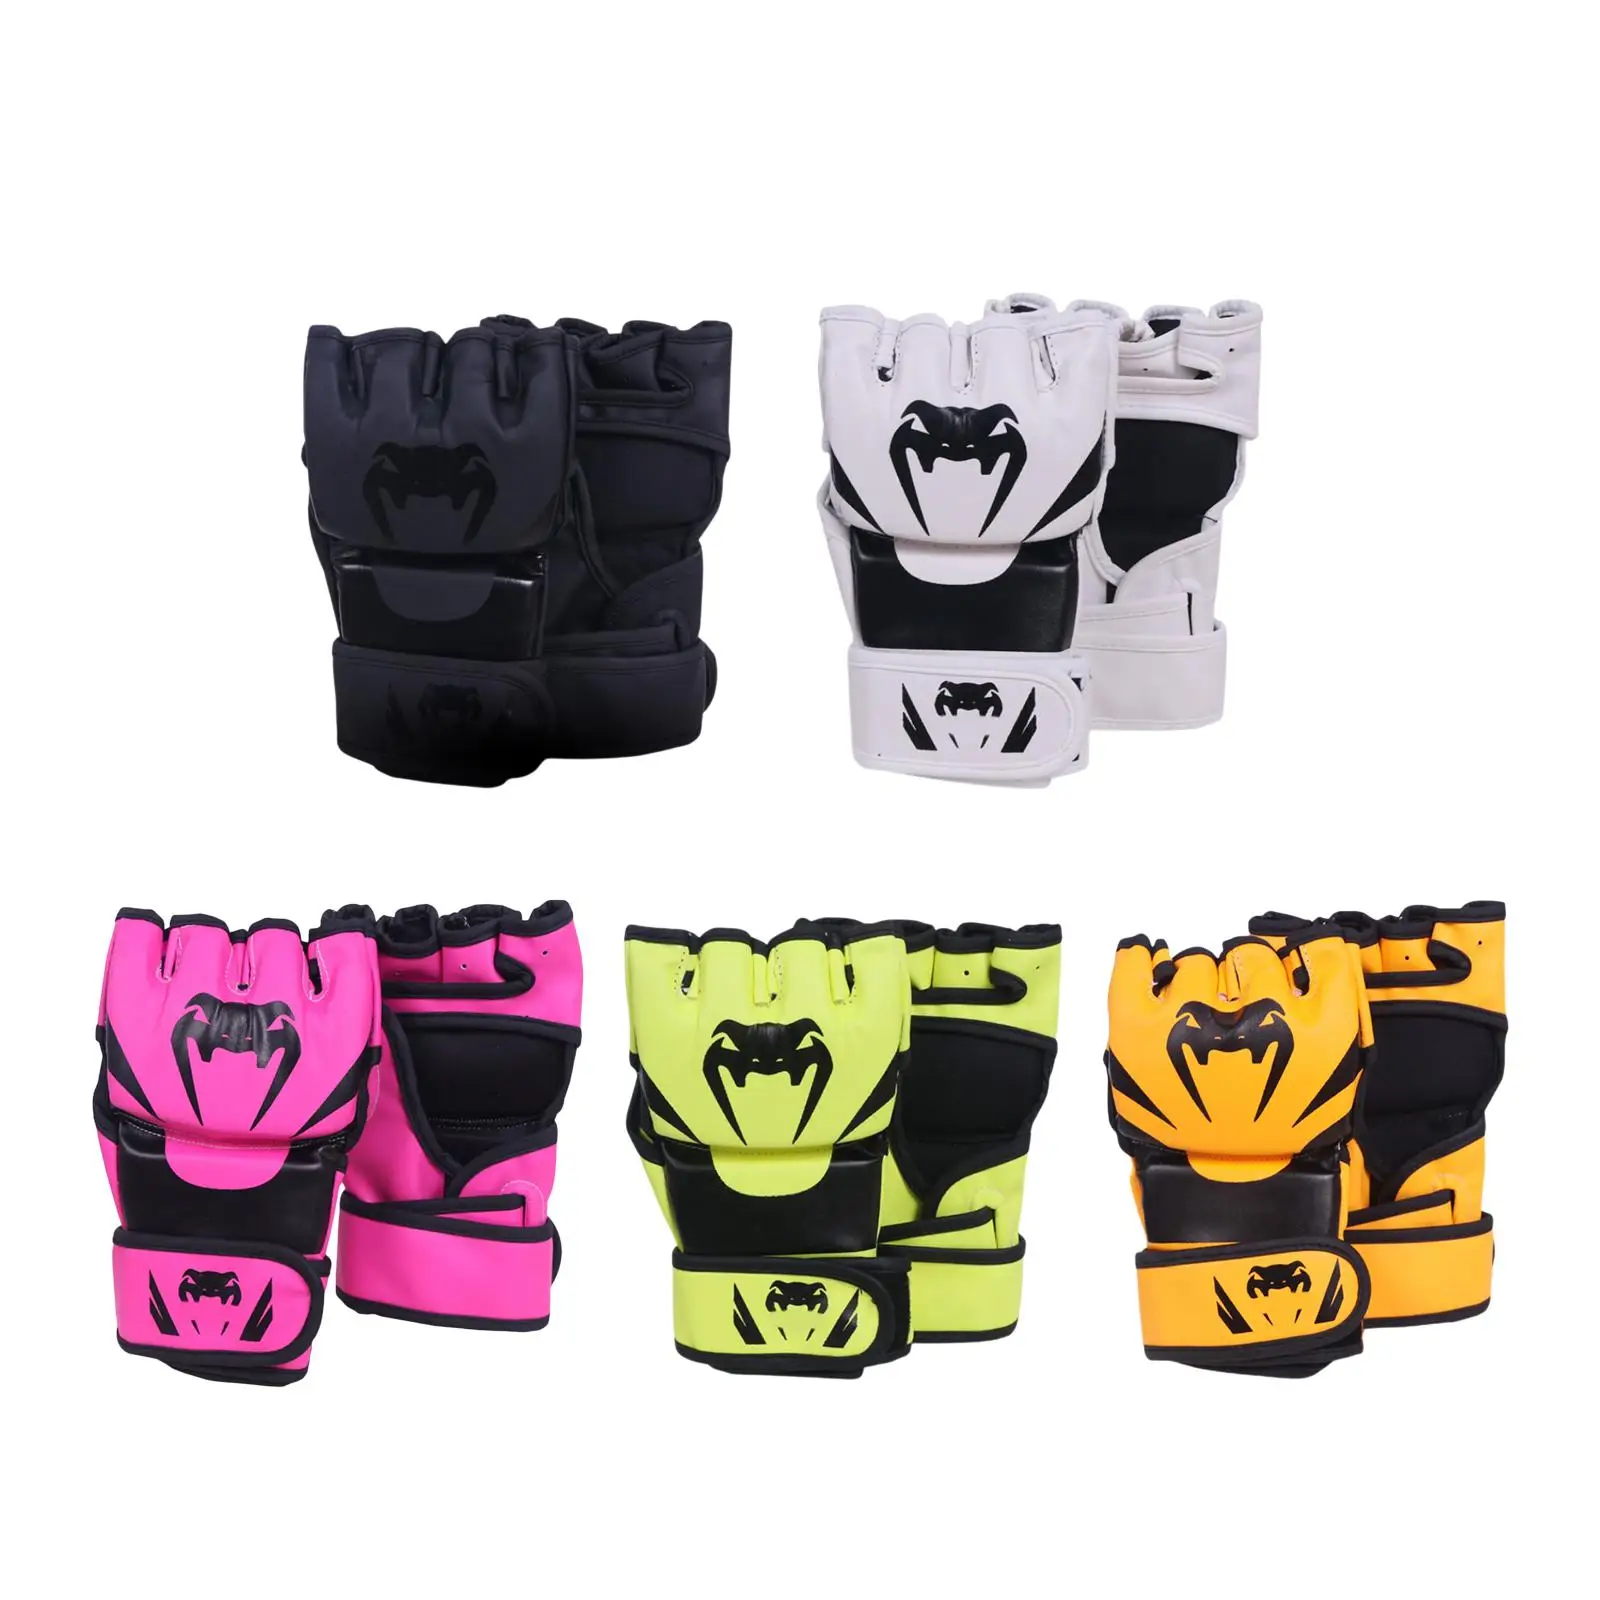 Mma Gloves Sparring Gear Waterproof Pressure Resistant Portable Open Palms Boxing Gloves for Men Women Unisex Grappling Sparring